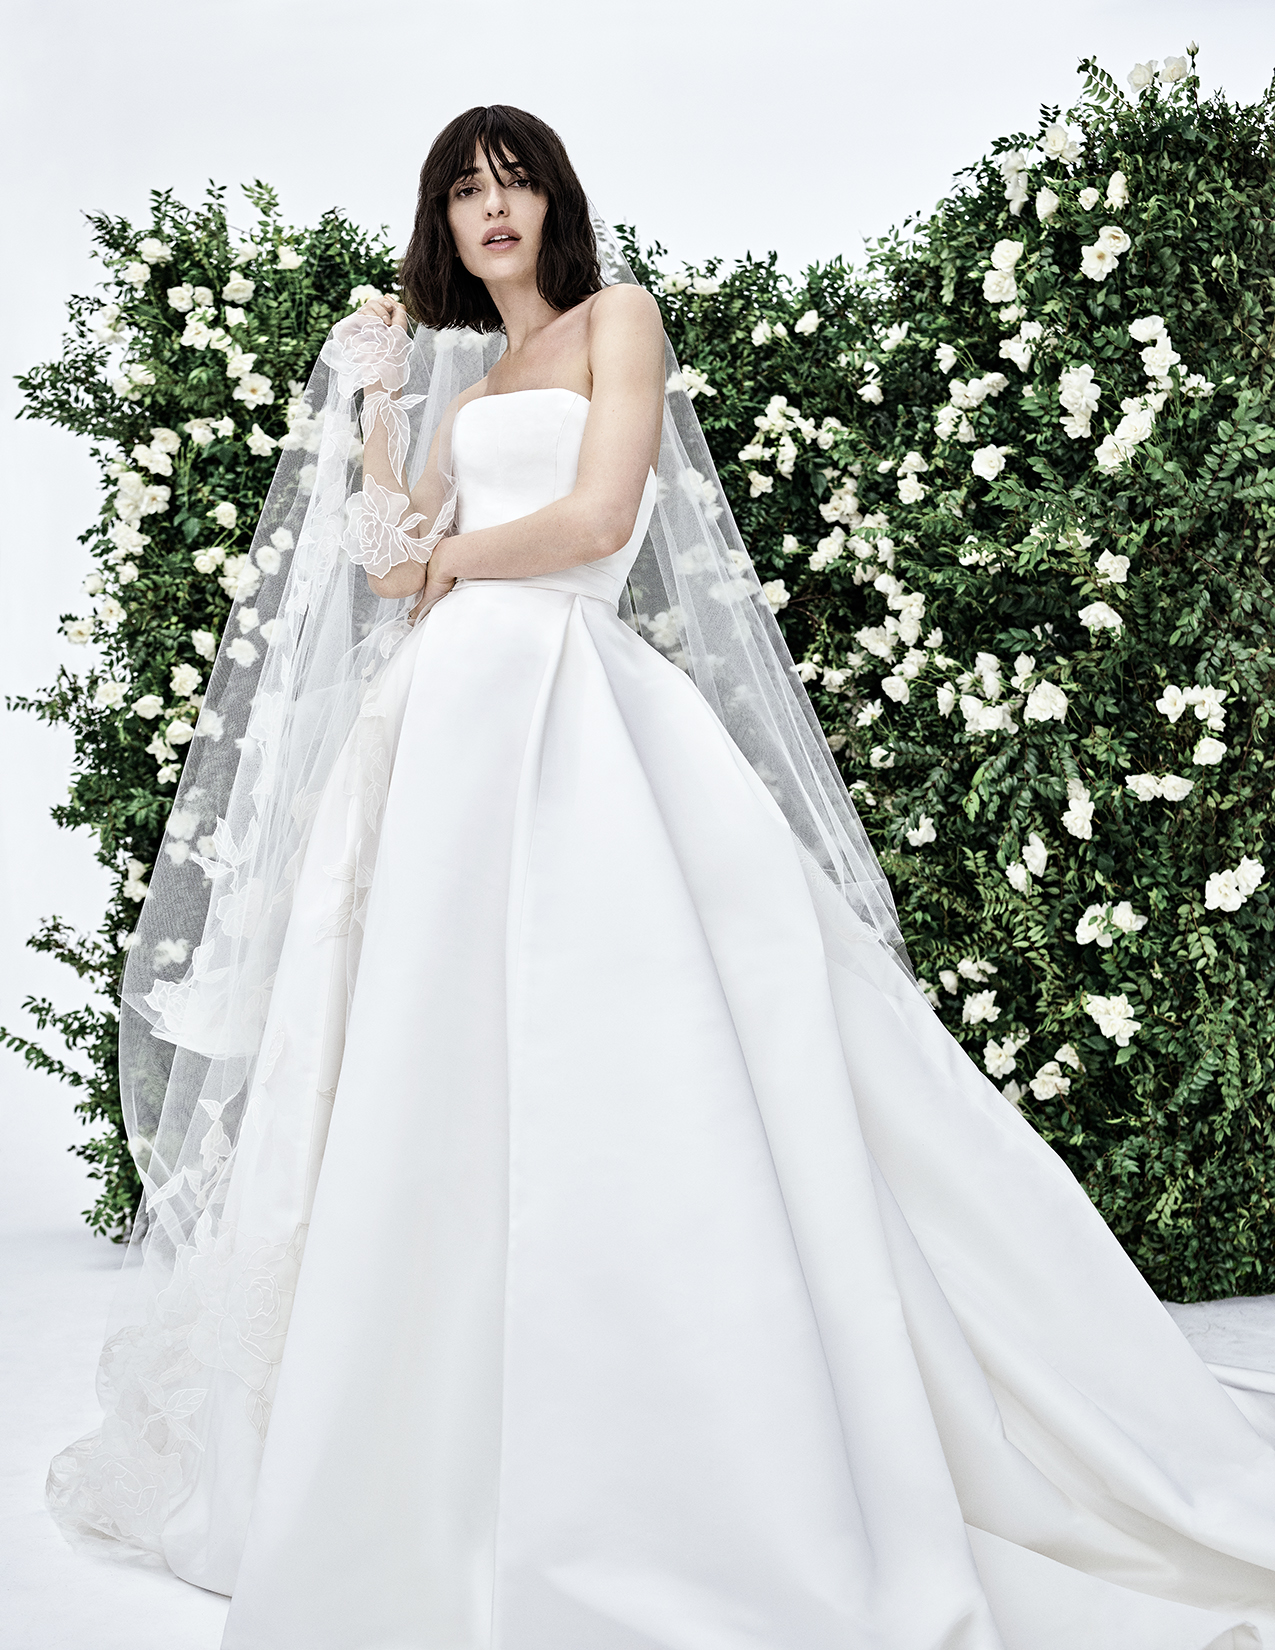 CHNY_SP20_BRIDAL_LONDON_NONEMBROIDERED_S2021N700SFA_F-2.jpg